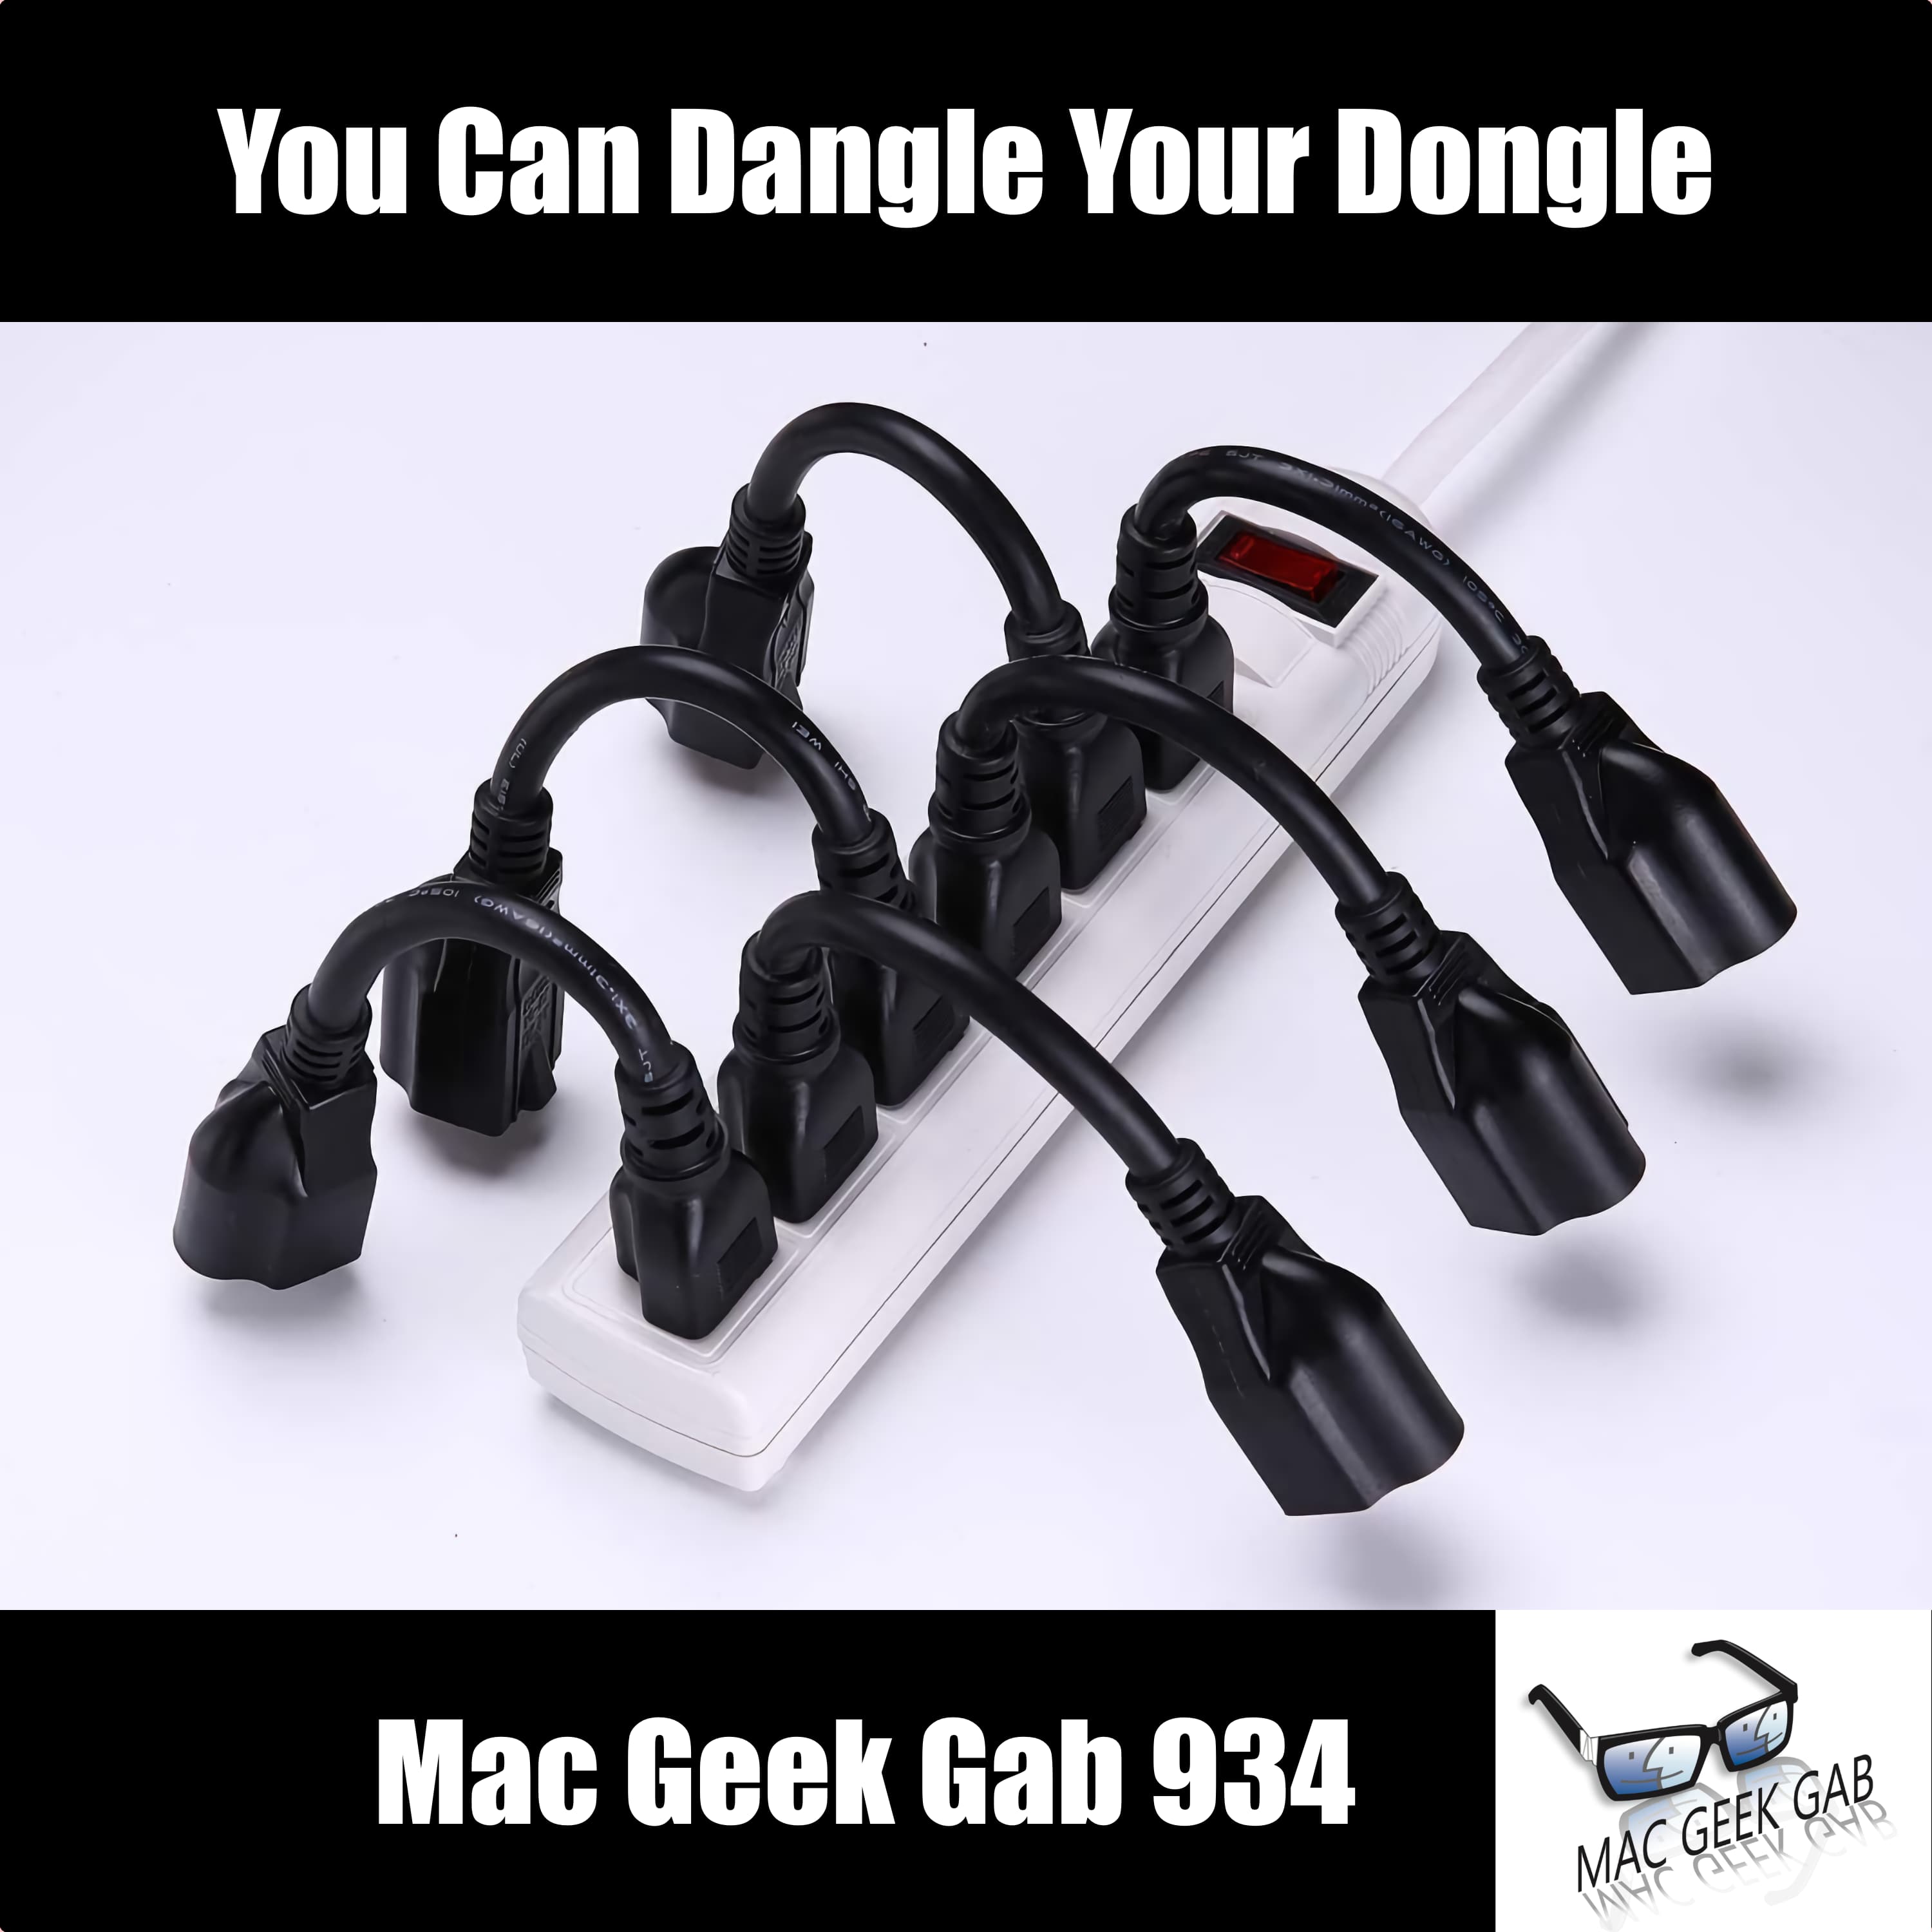 You Can Dangle Your Dongle